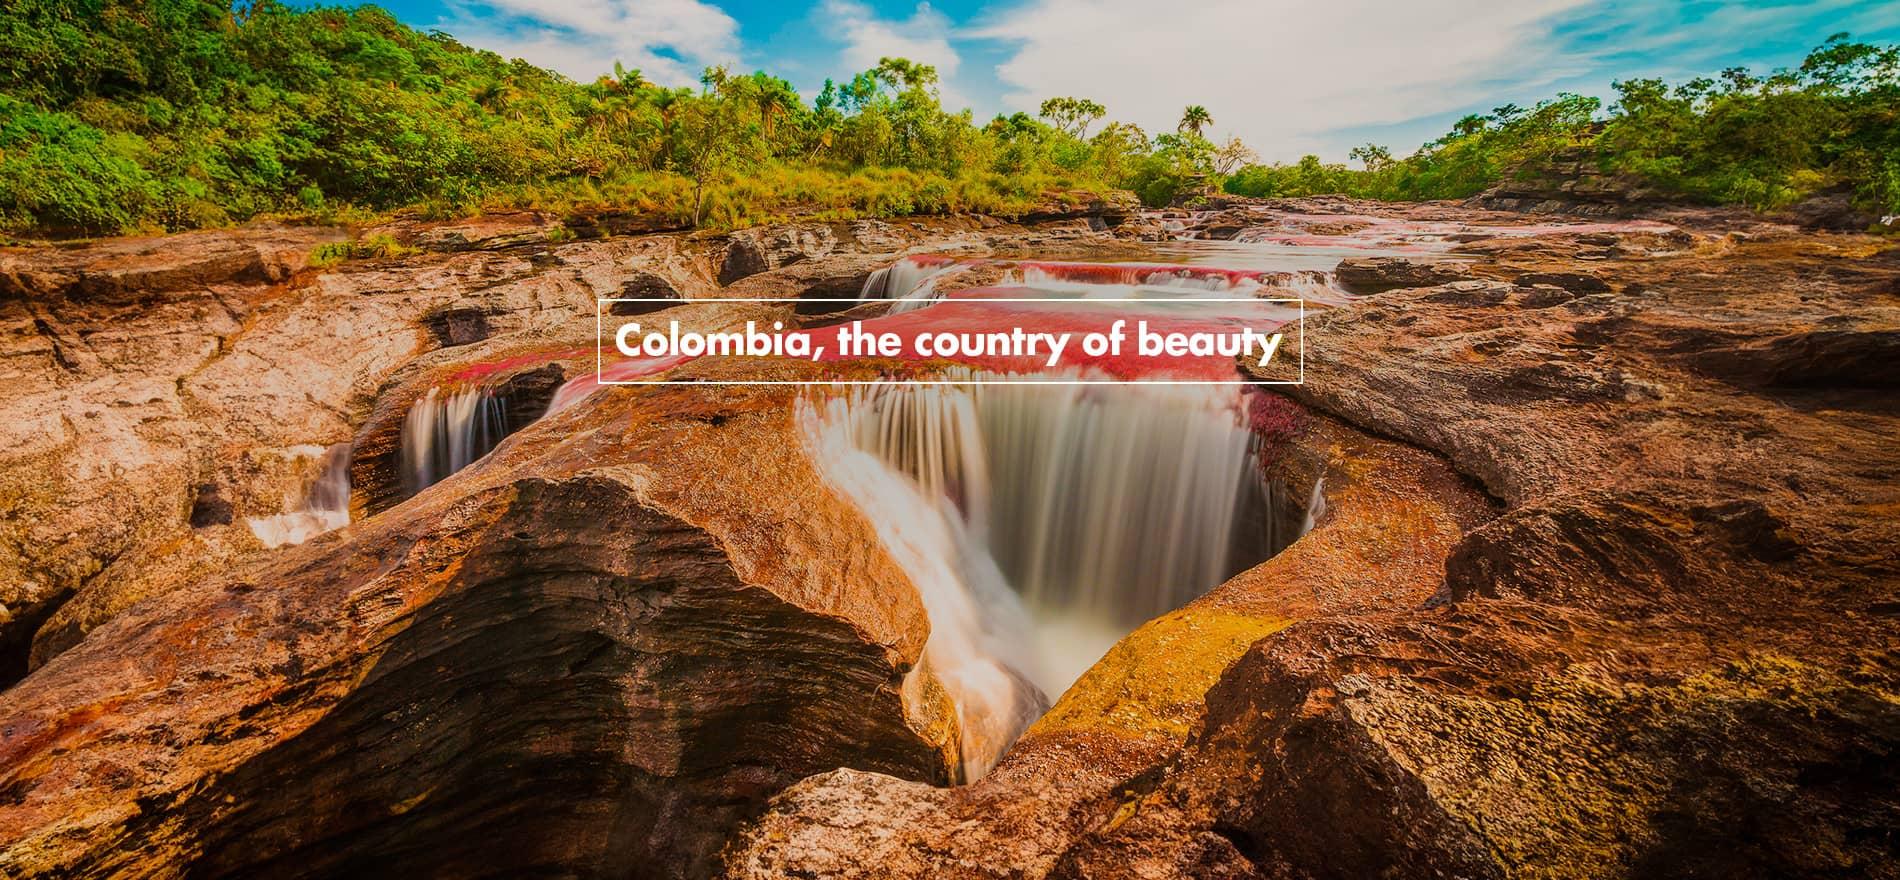 Colombia country of beauty